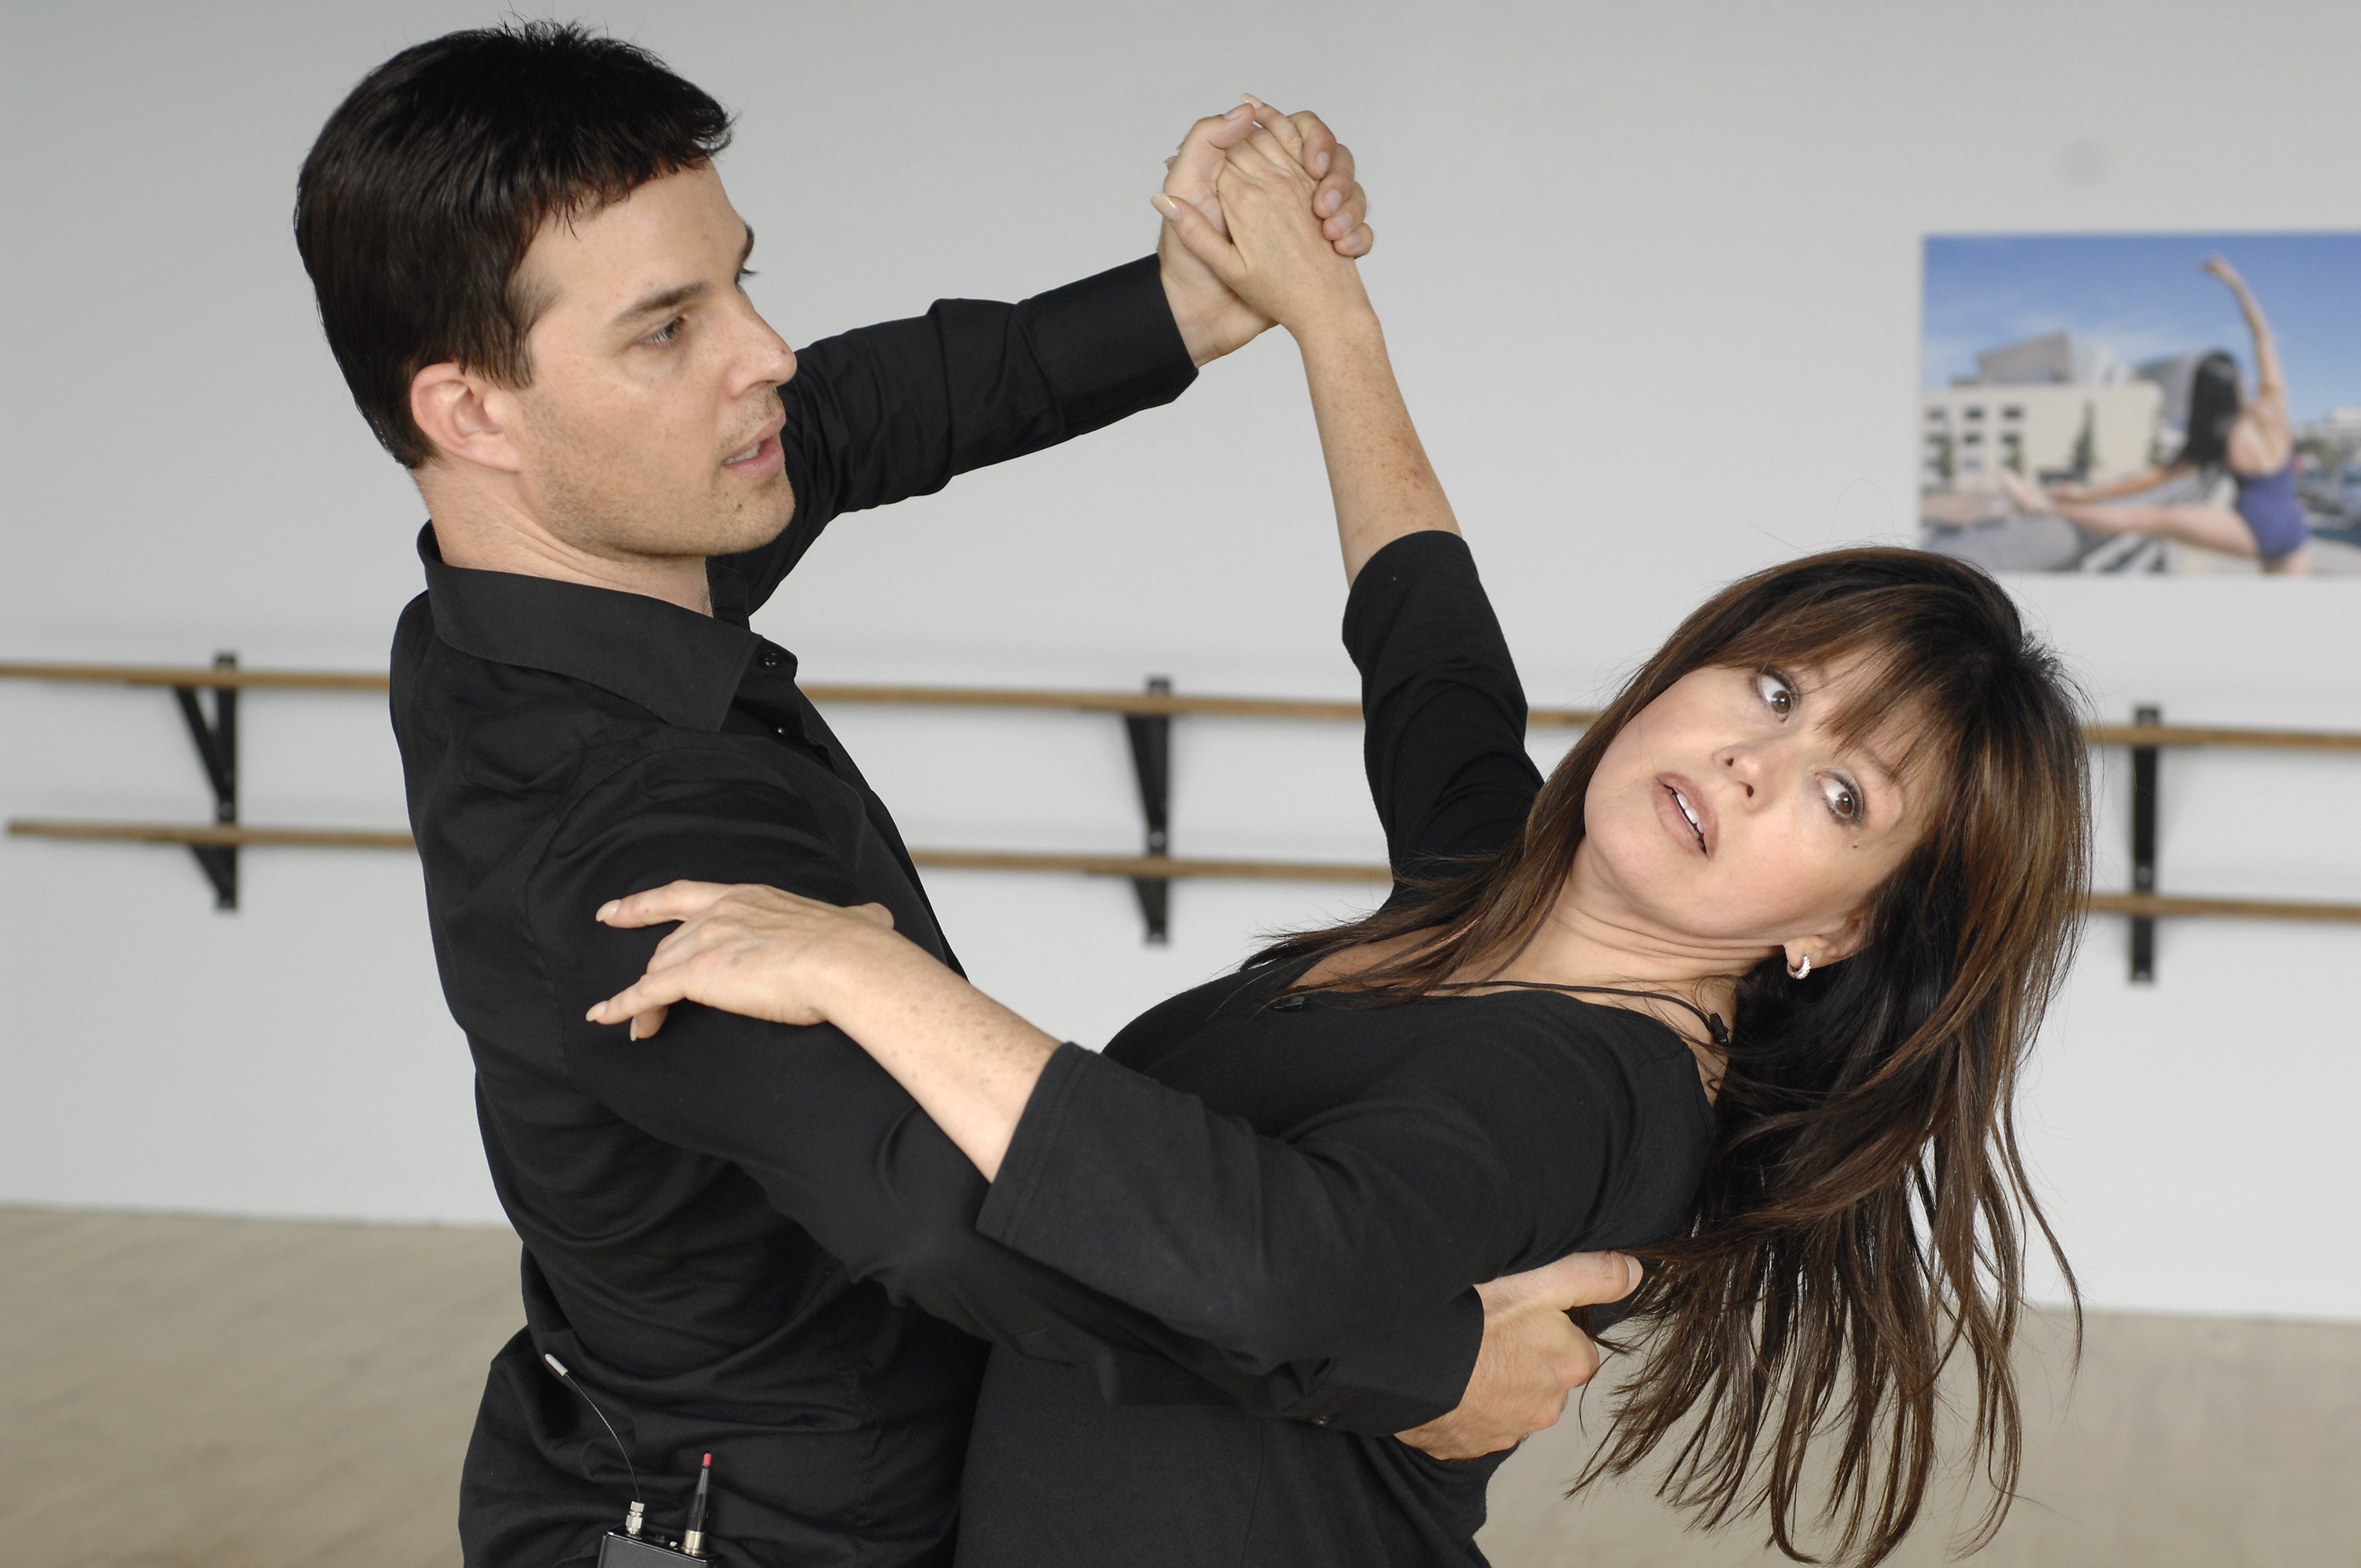 Marie Osmond practicing with Jonathan Roberts for "Dancing with the Stars" on September 14, 2007 | Source: Getty Images